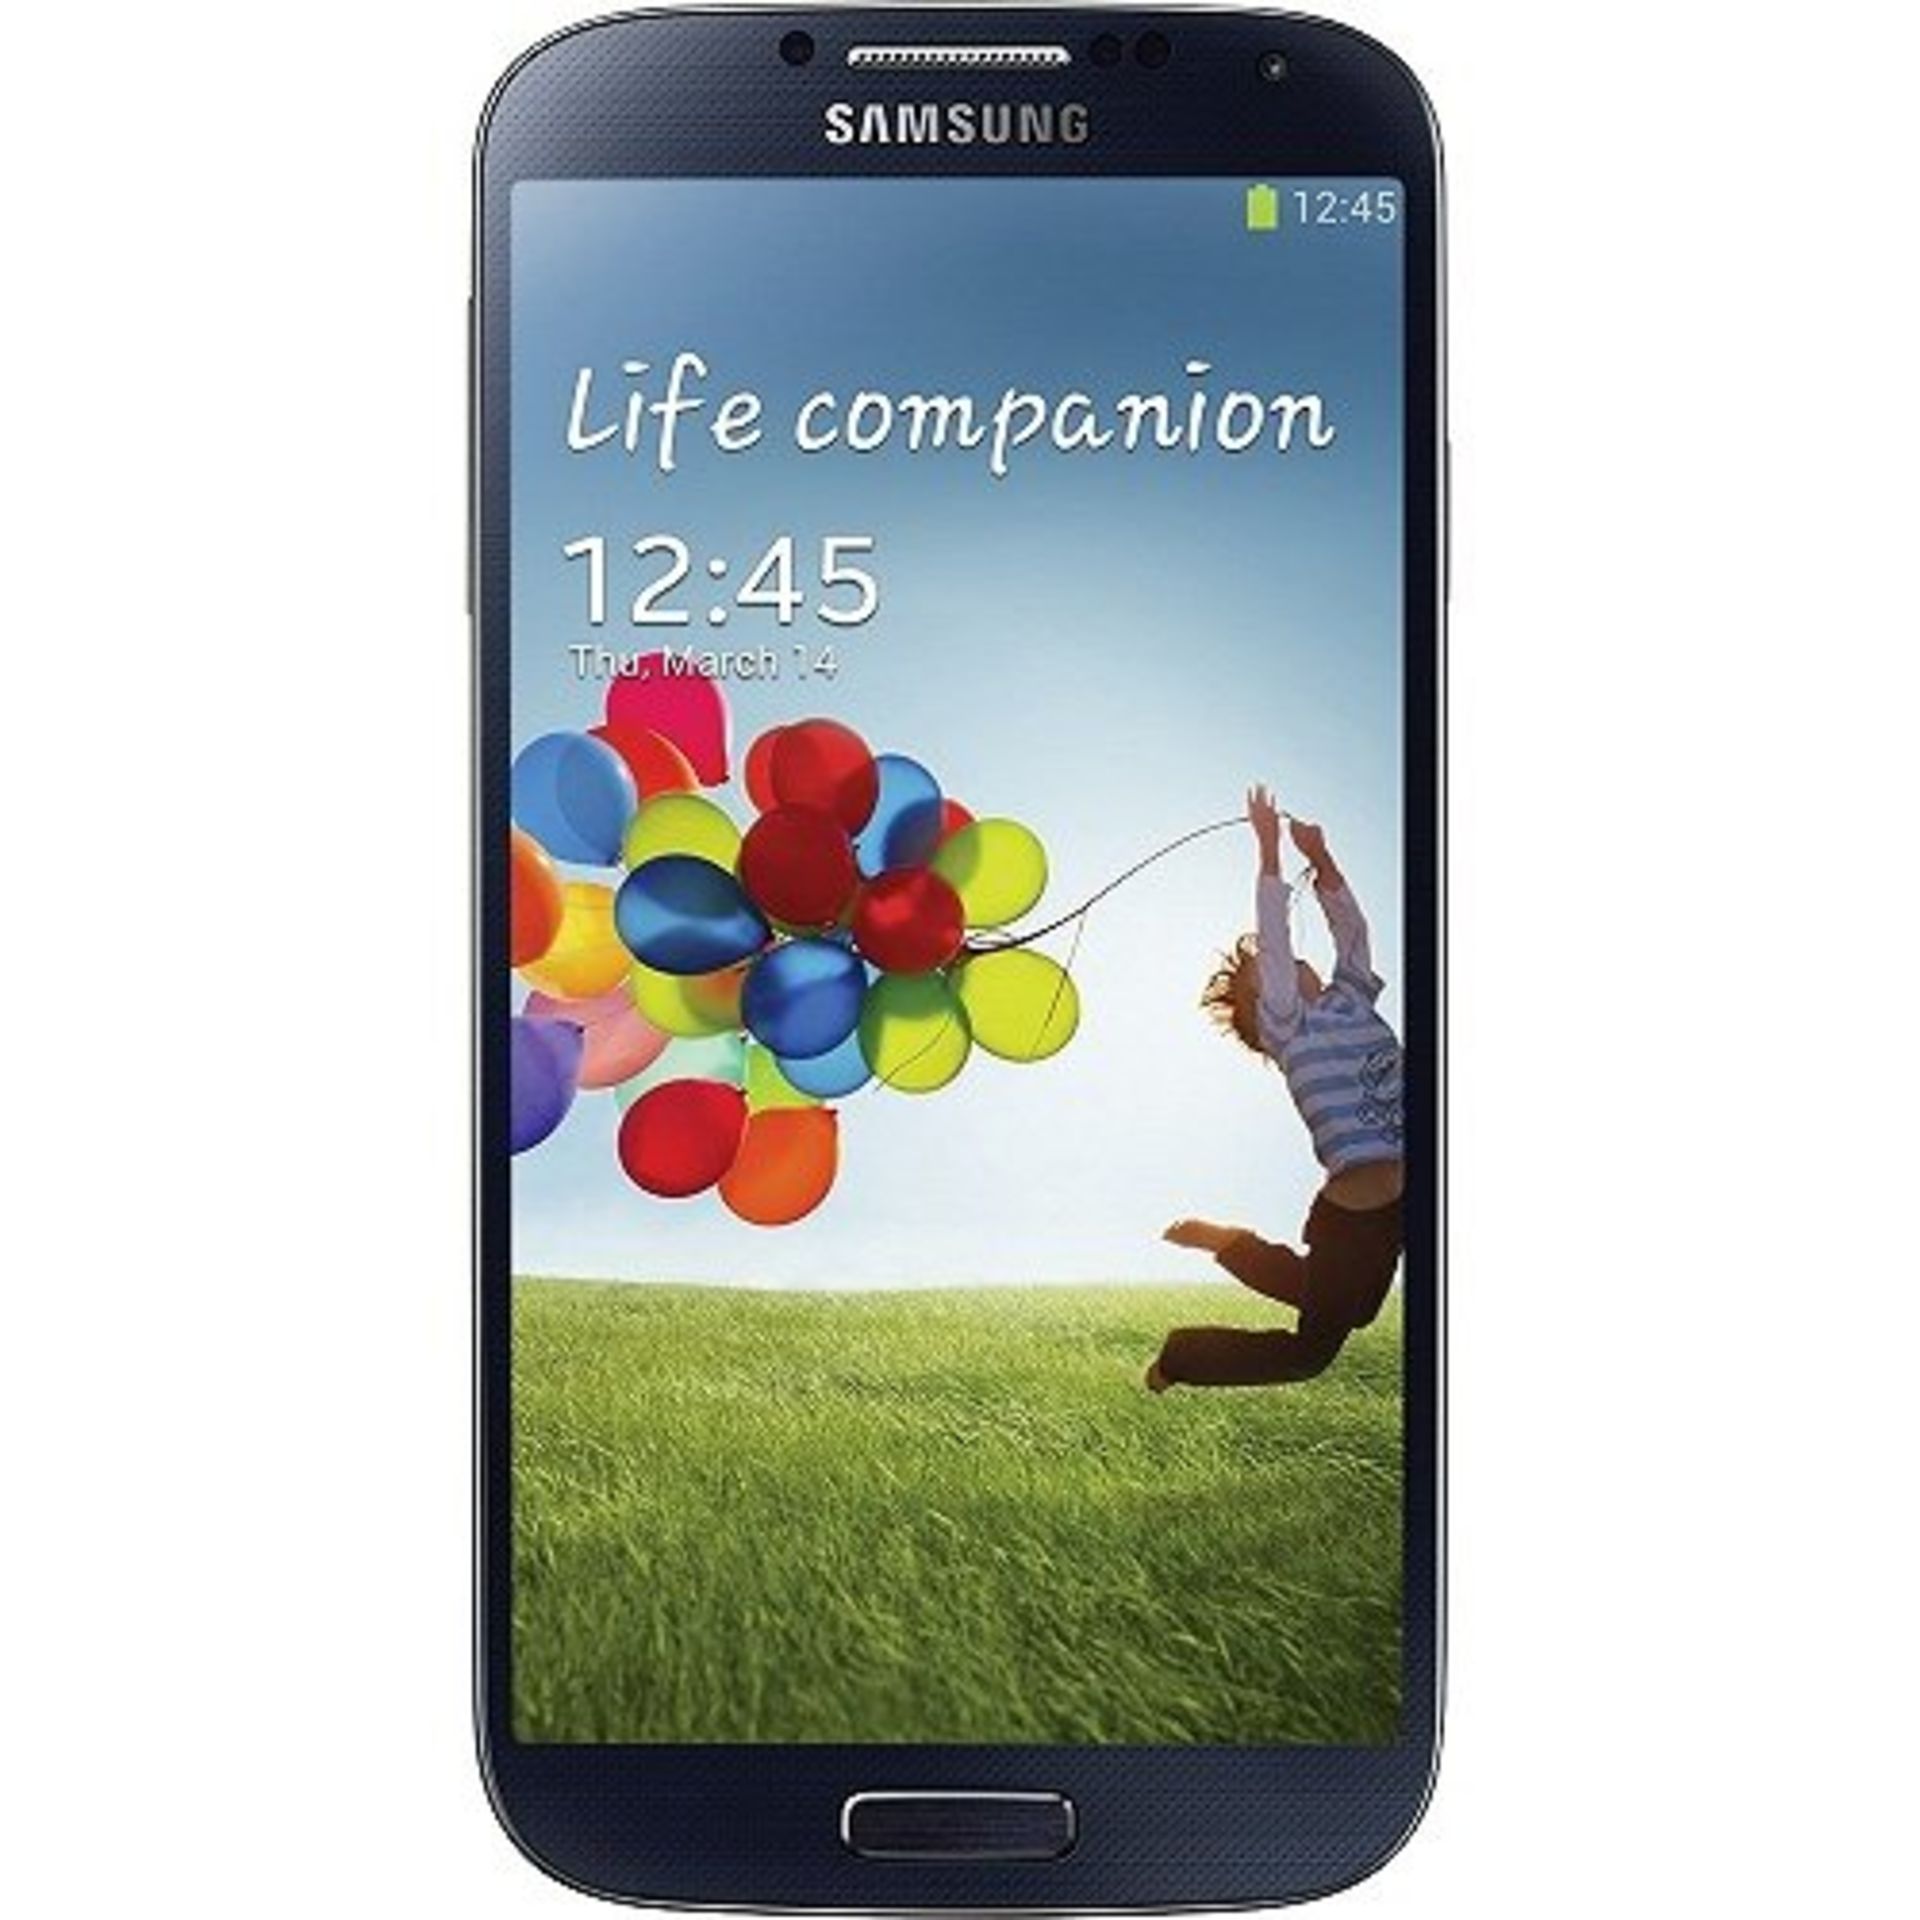 Grade A Samsung S4(i9500) Colours May Vary Item available approx 12 working days after sale